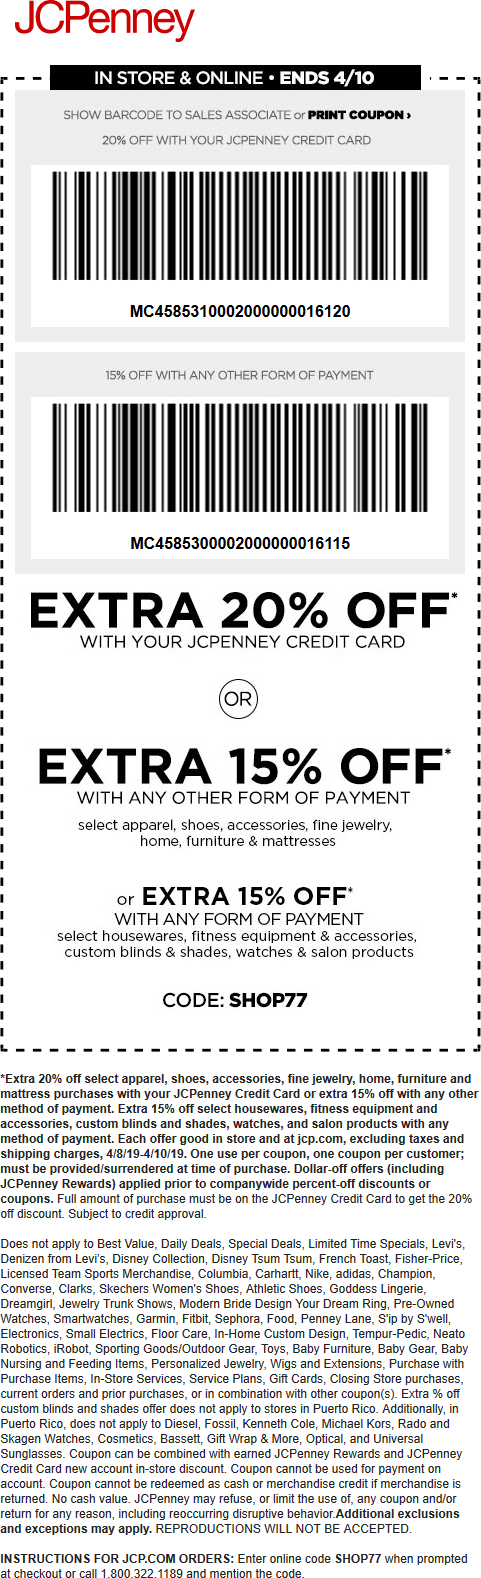 JCPenney coupons & promo code for [June 2022]